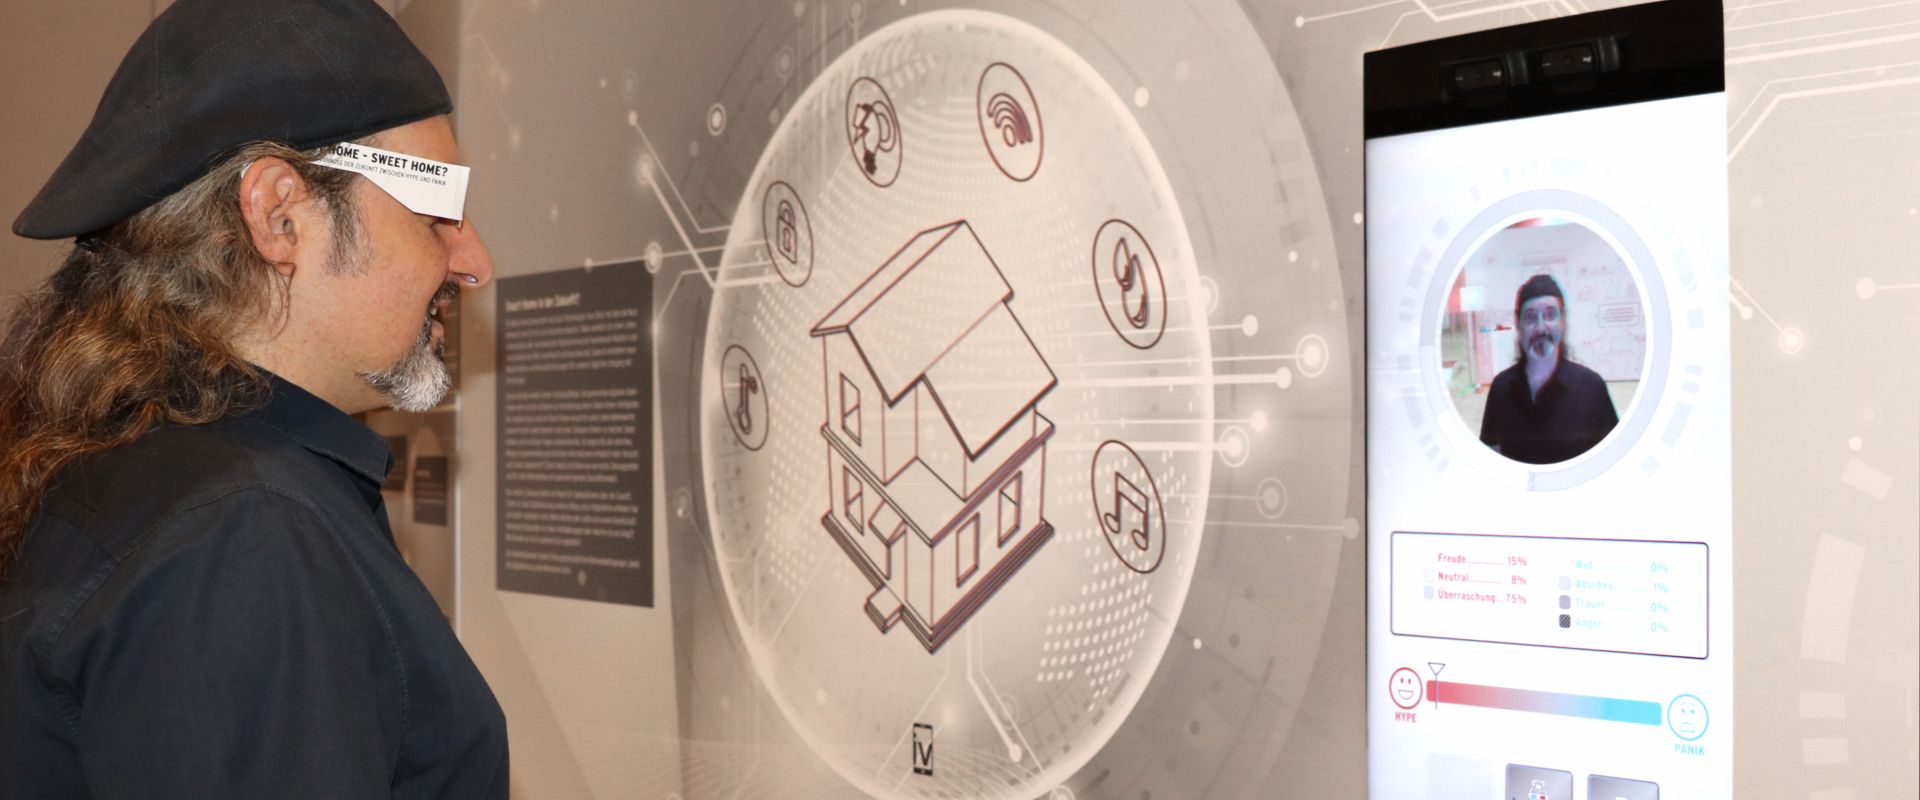 Smart home exhibition on technological possibilities and data protection